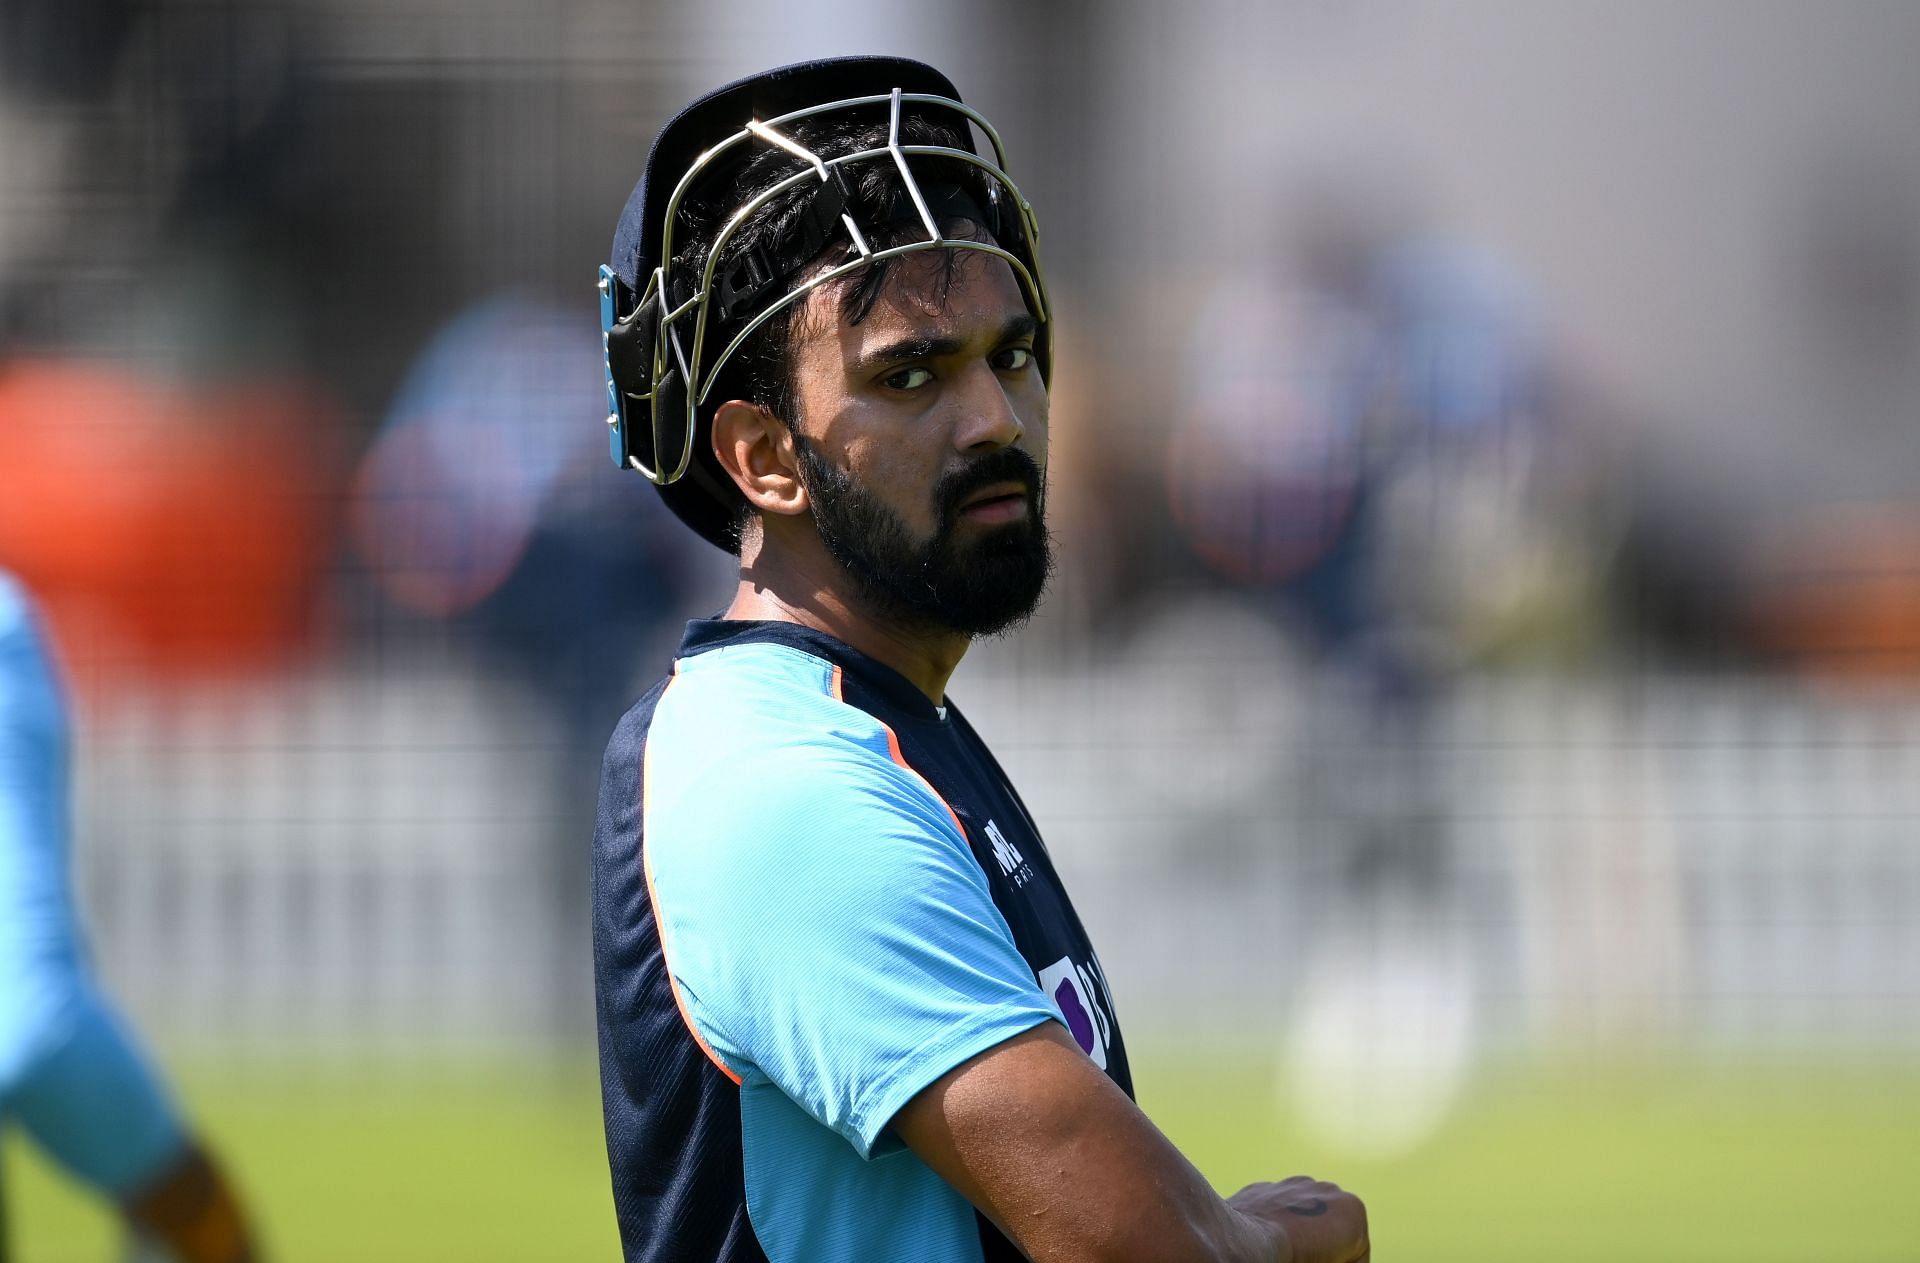 Rahul is yet to win a match as the captain of the Indian cricket team (Image: Getty)